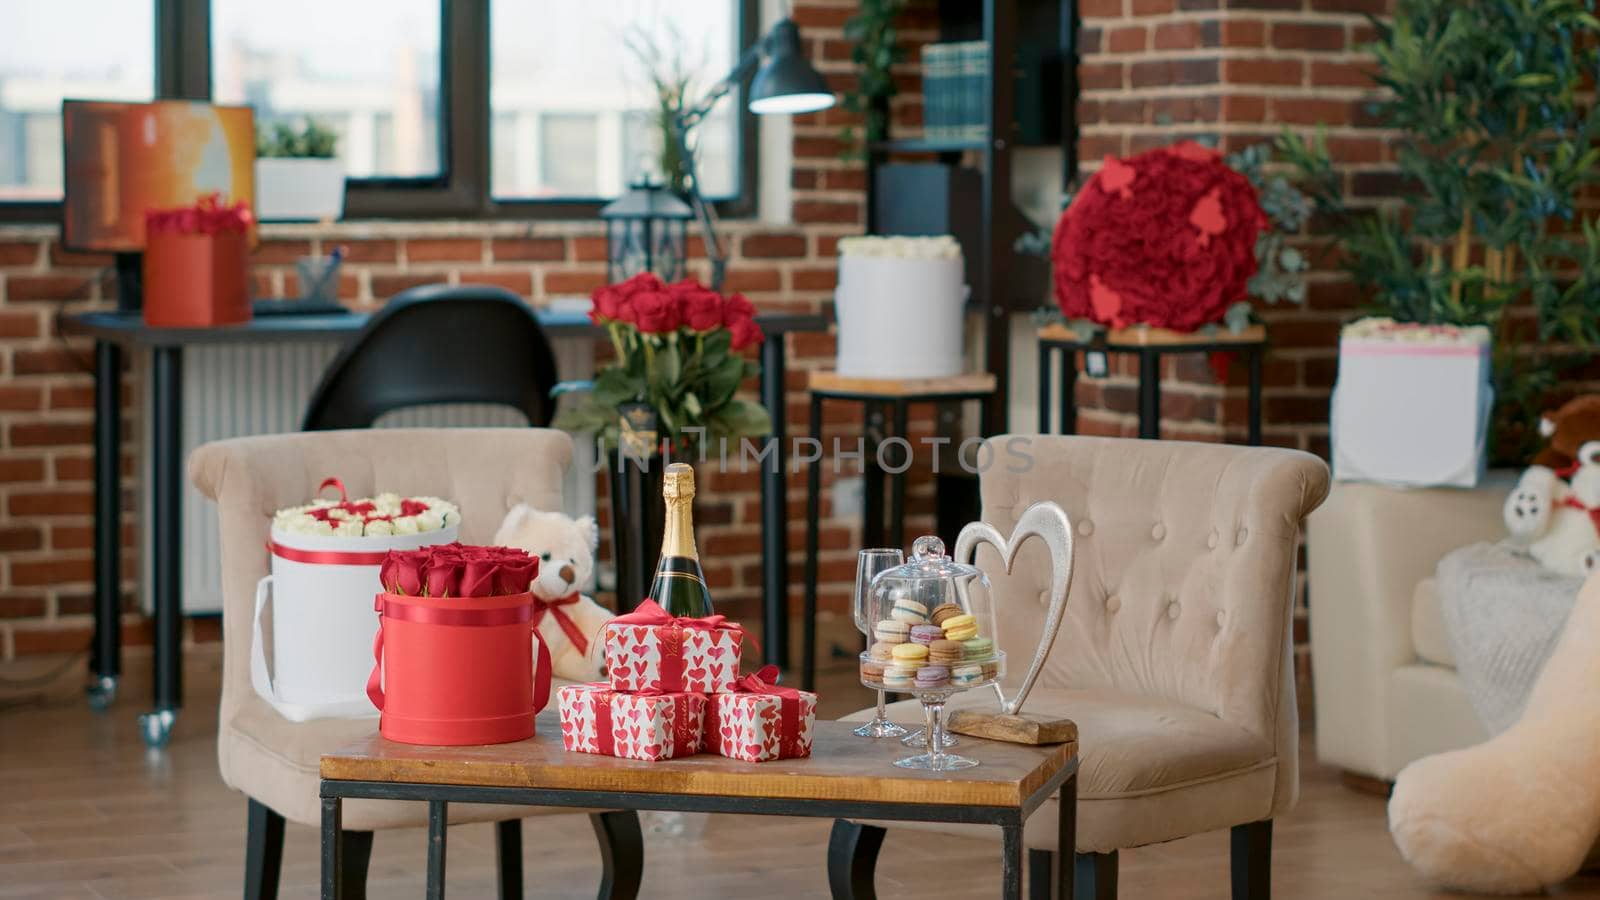 Empty living room decorated by boyfriend with valentine day romantic presents for girlfriend to celebrate romance anniversary at home. Living room with red roses on table. Concept of valentines-gift